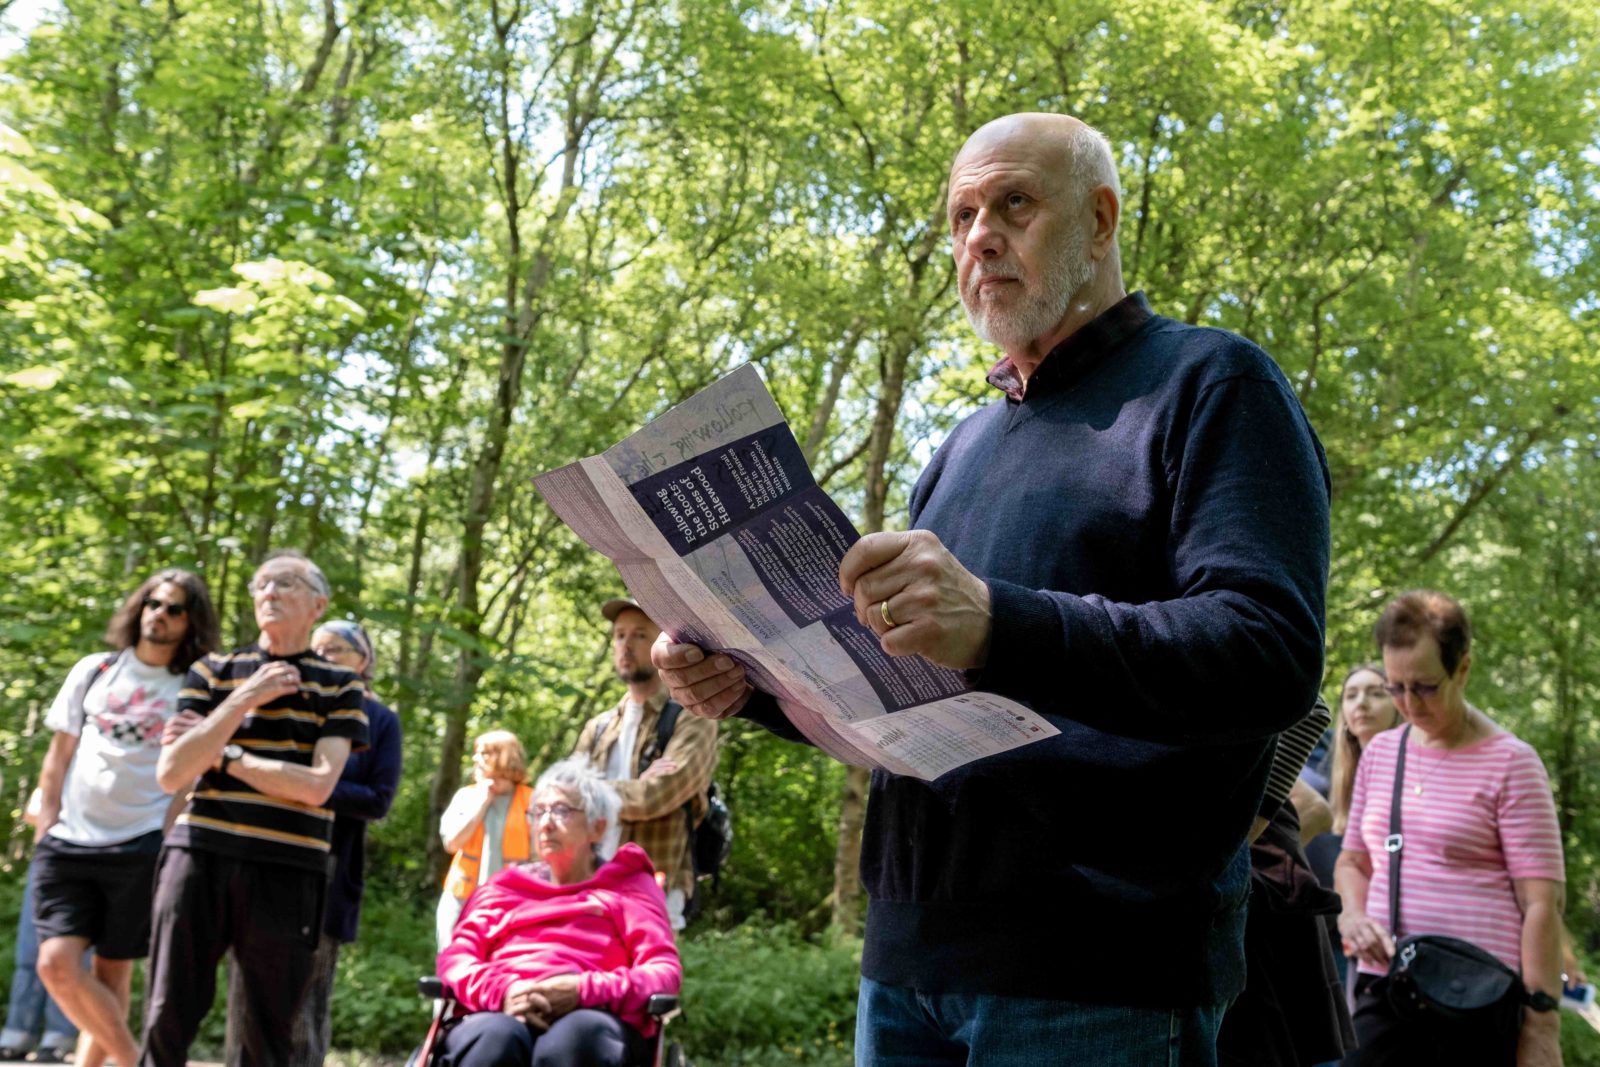 A man is holding a map in the forest, looking up. Several other people are in the background looking in the same direction.